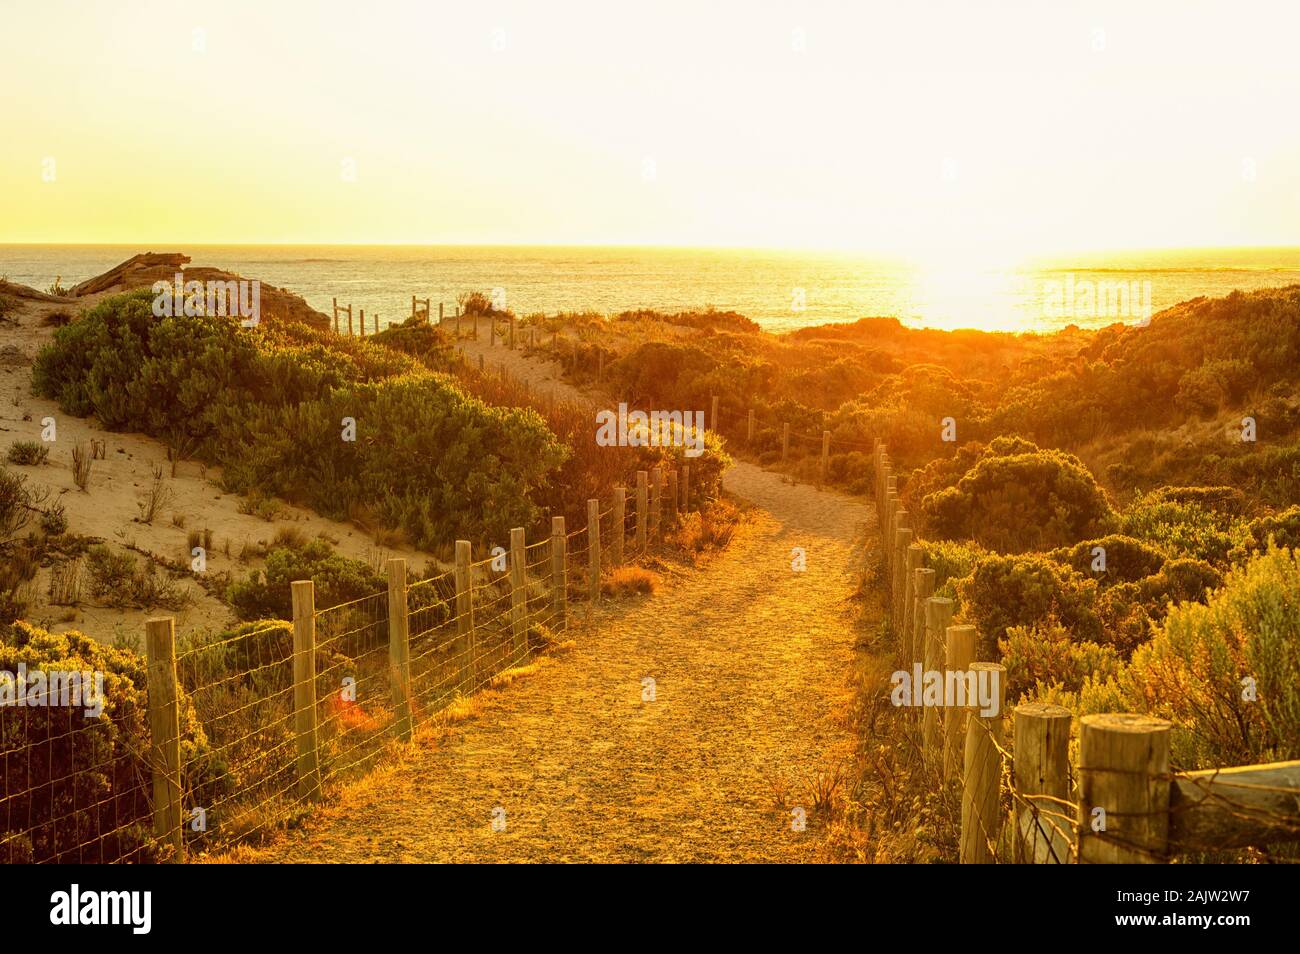 A picturesque footpath to the beach on sunset. Photo taken in South Australia. Stock Photo